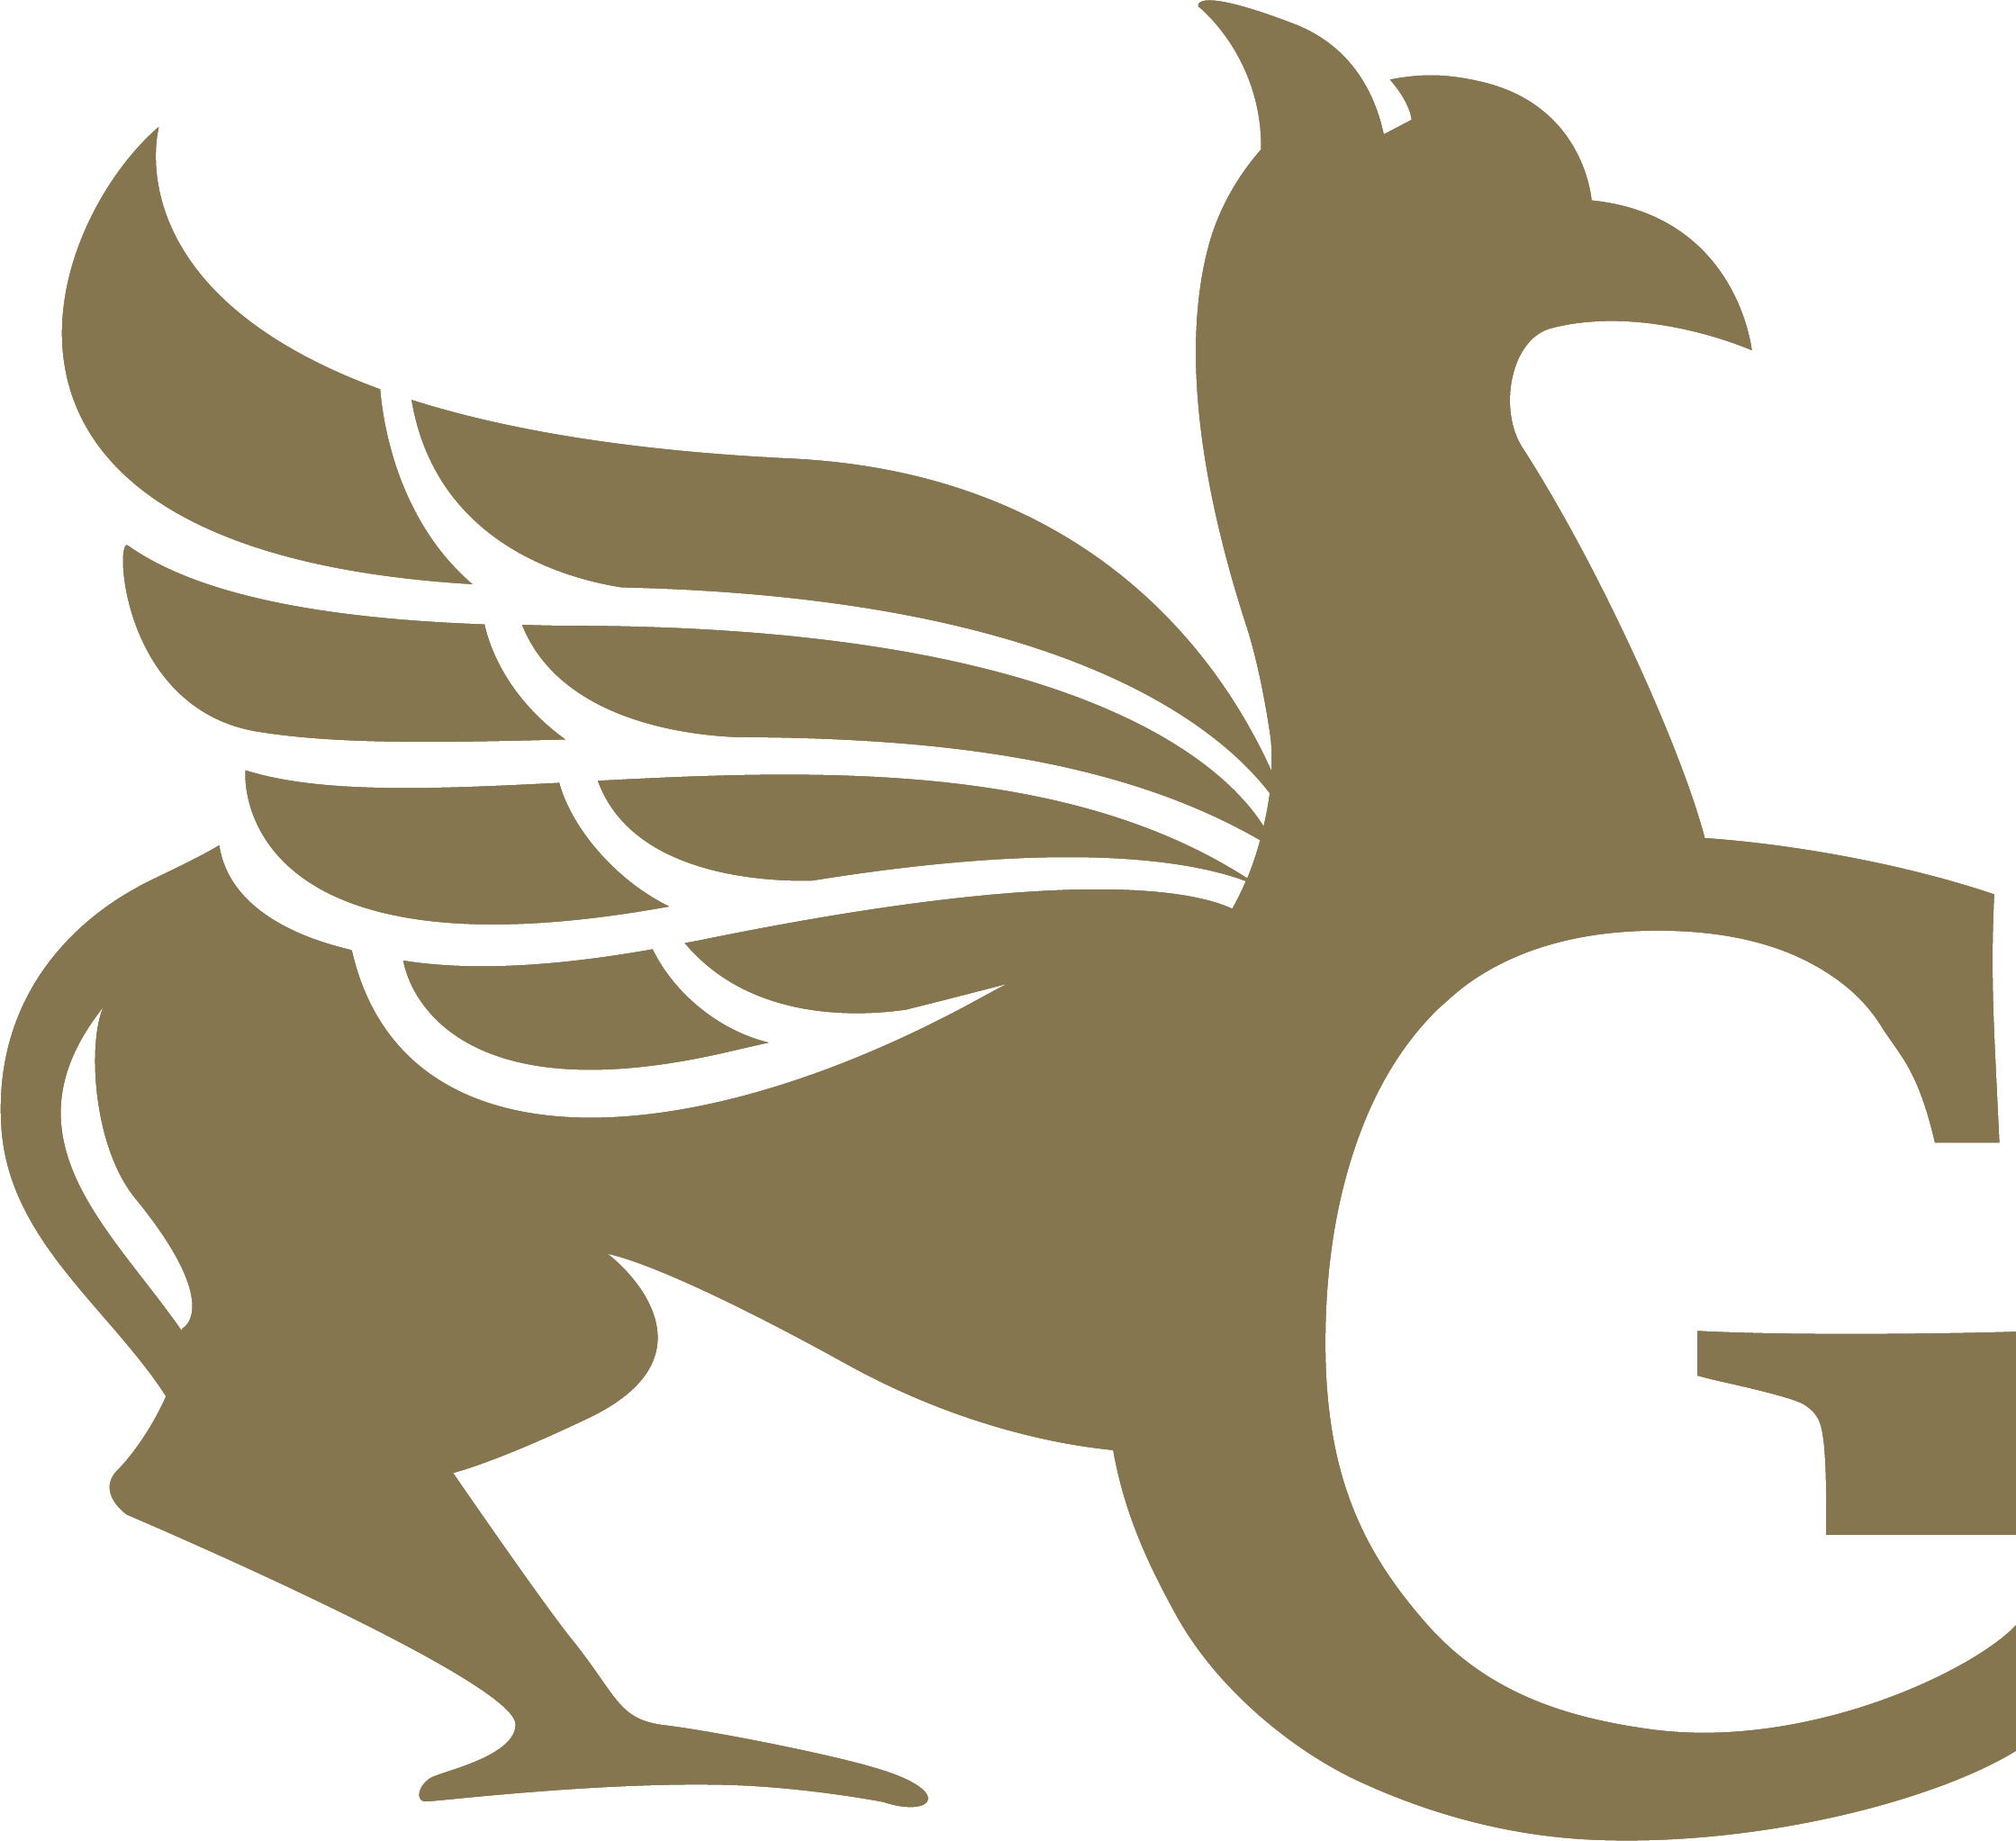 Guardian logo of a griffin and G in gold